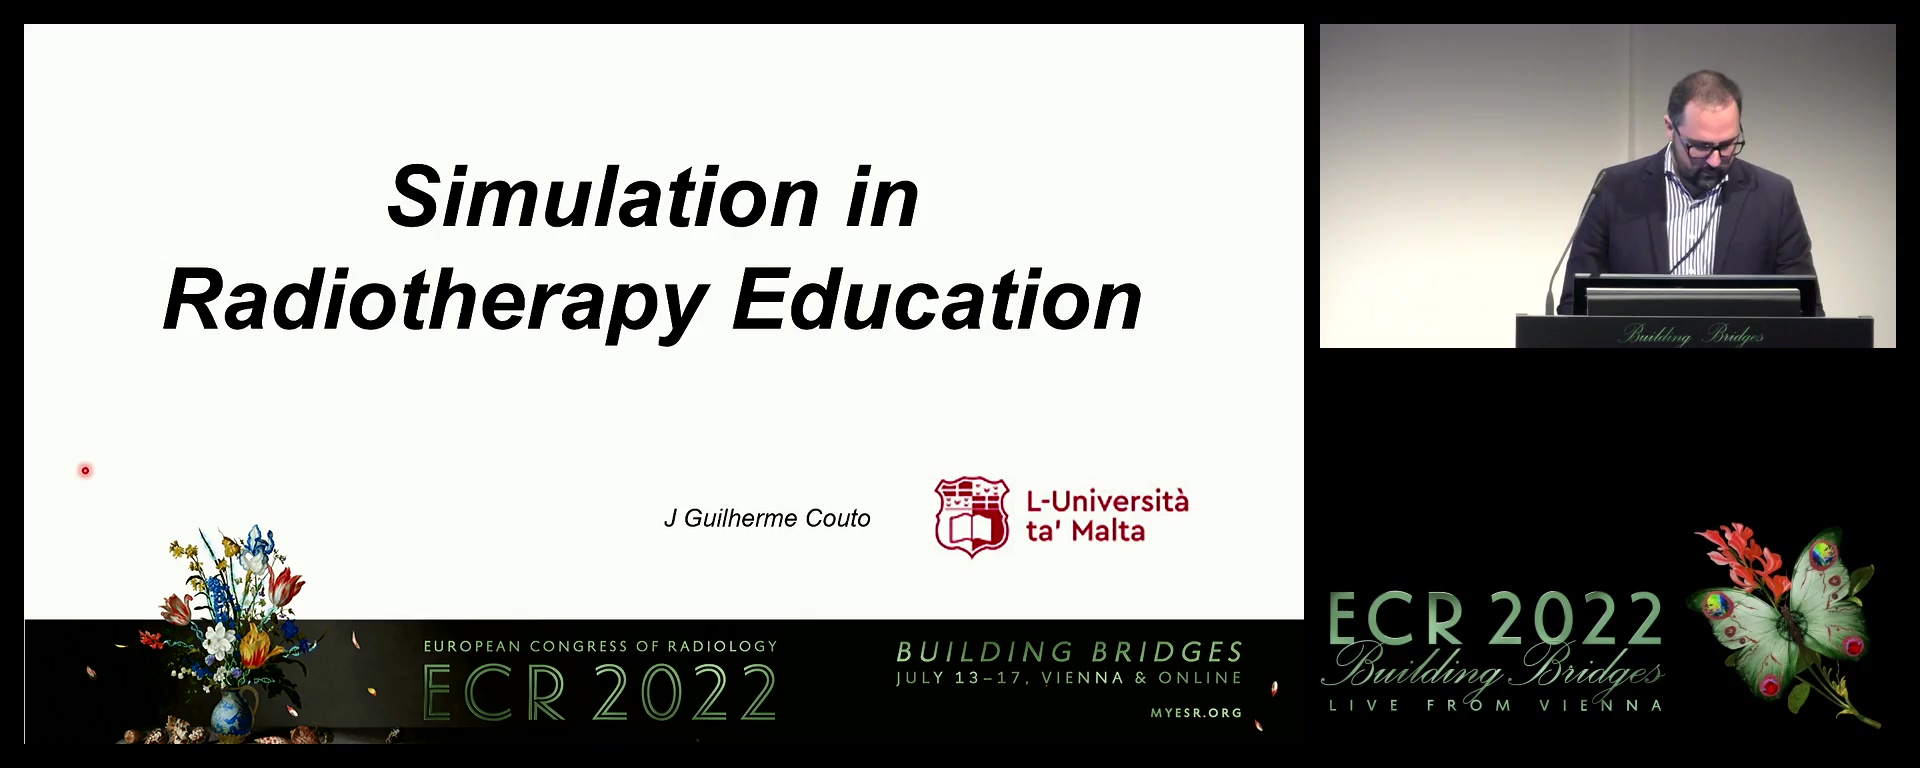 Simulation in radiotherapy education - Jose Guilherme Couto, Msida / MT